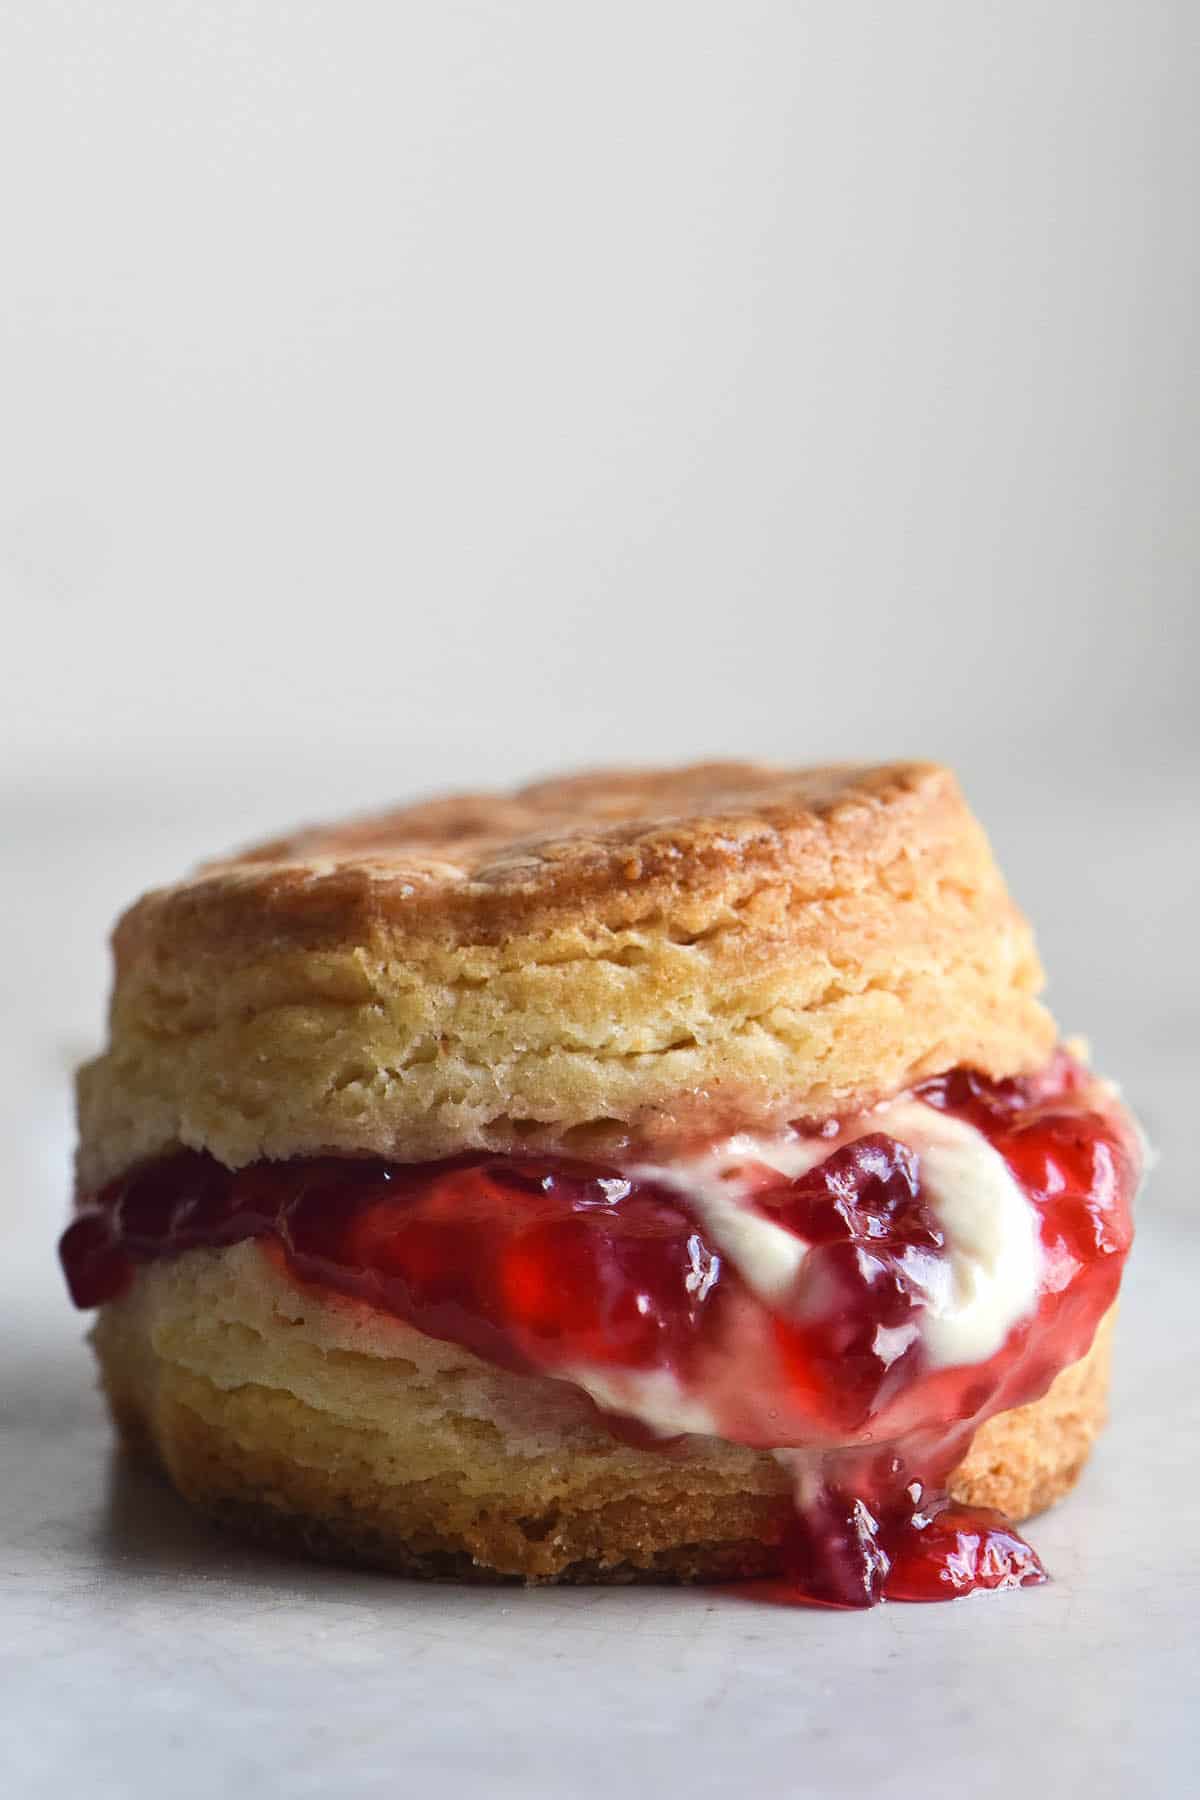 A side on image of a gluten free scone filled with jam and cream. The scone sits on a white marble table against a white backdrop